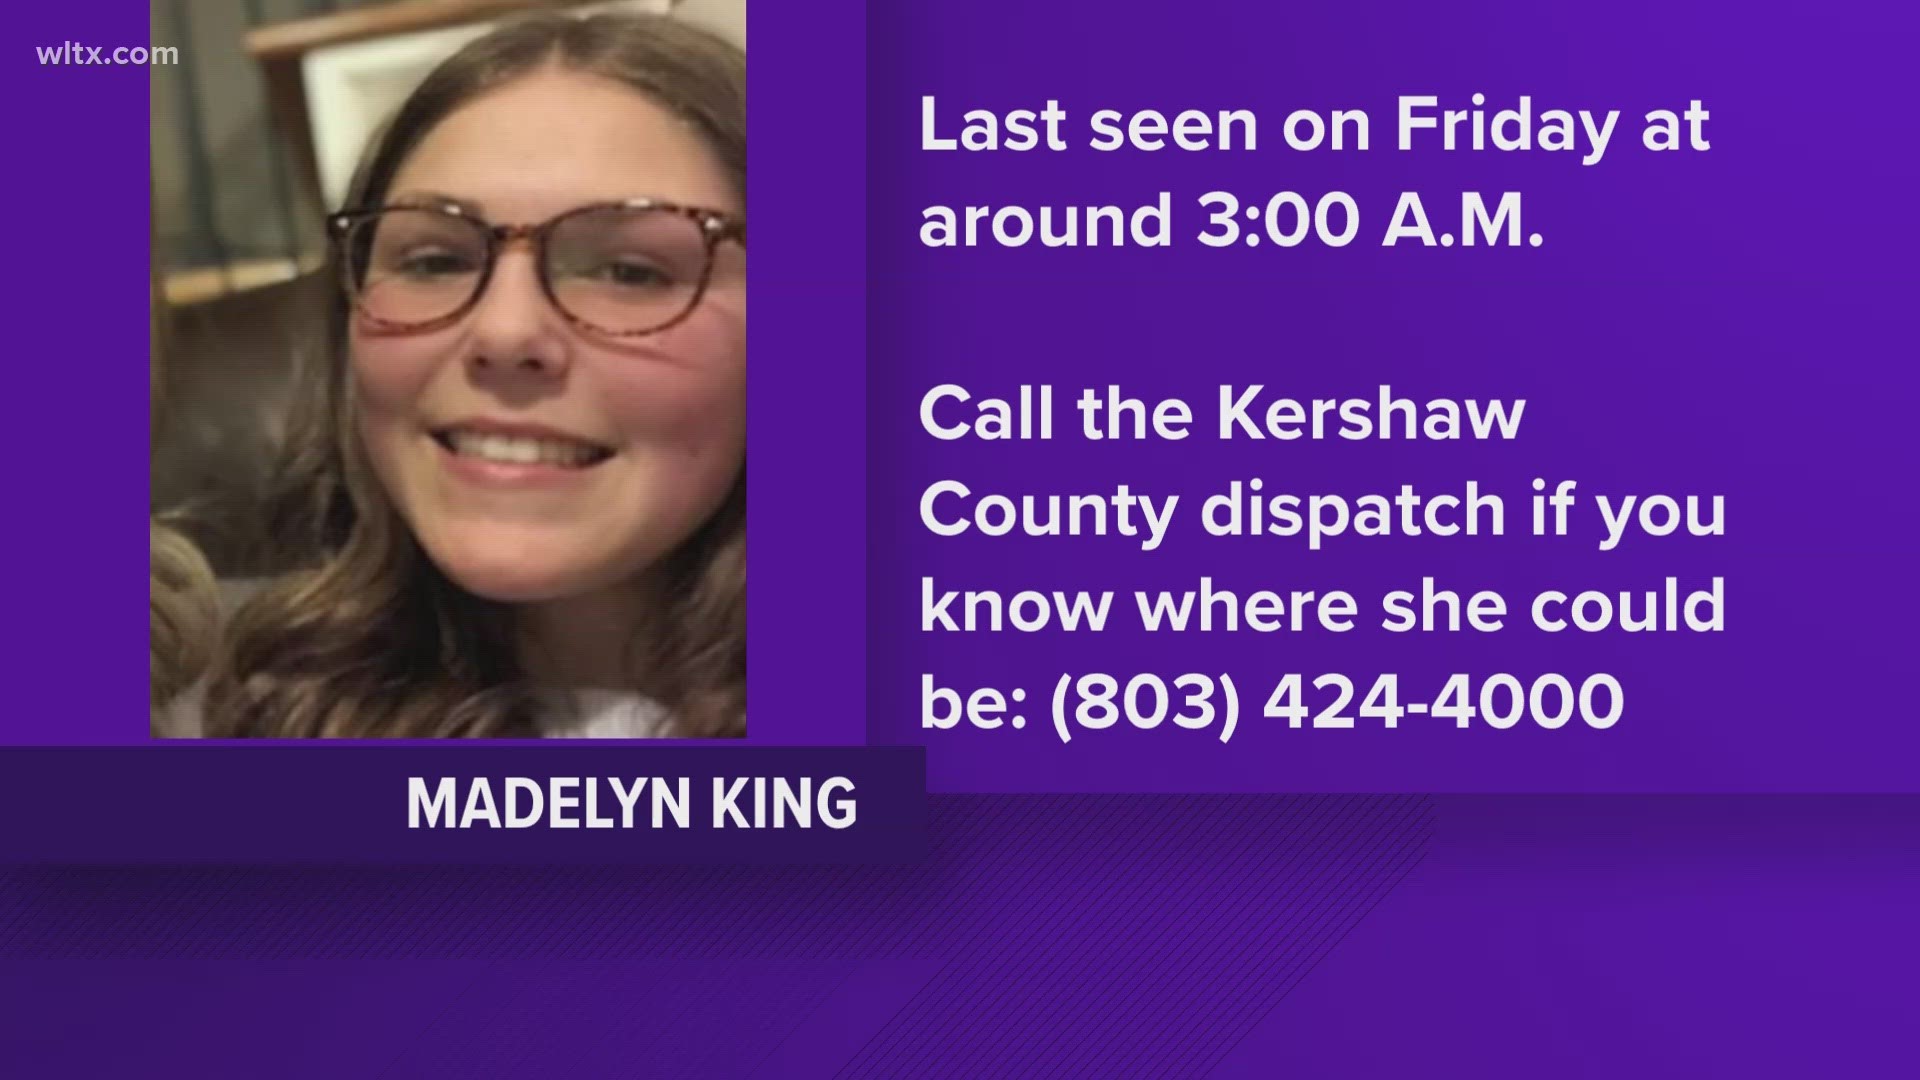 Anyone with information on the child's location is urged to call Kershaw County dispatch.